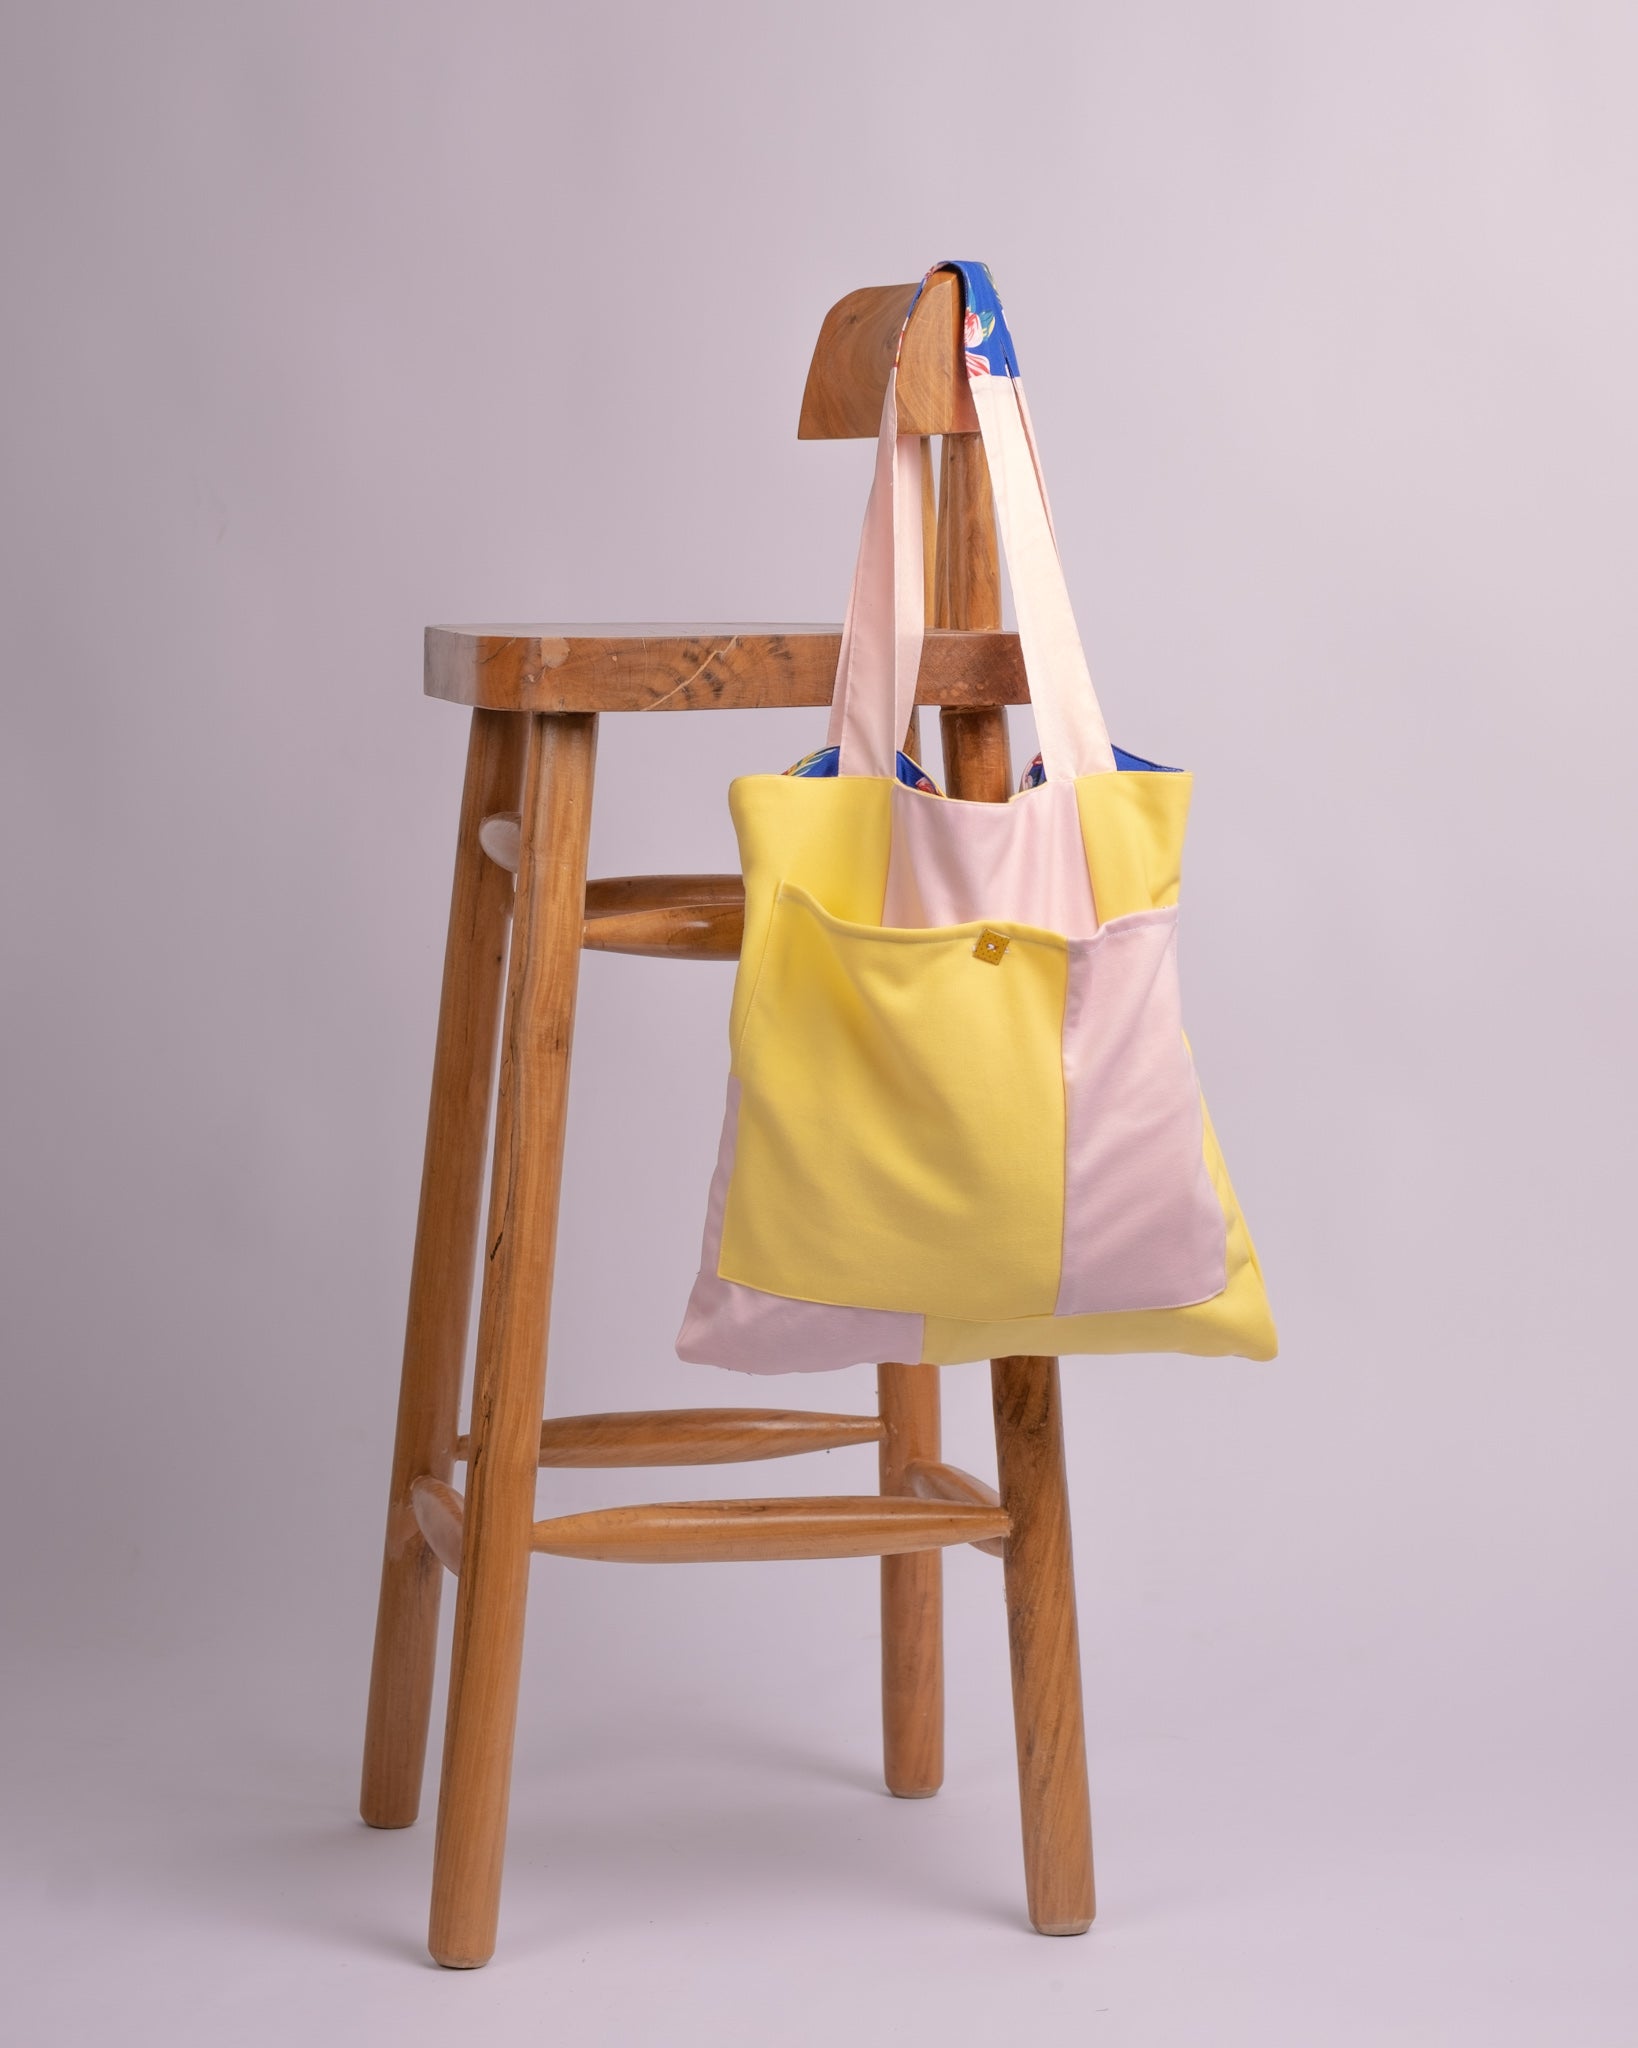 For Beach Days Reversible Tote Bag